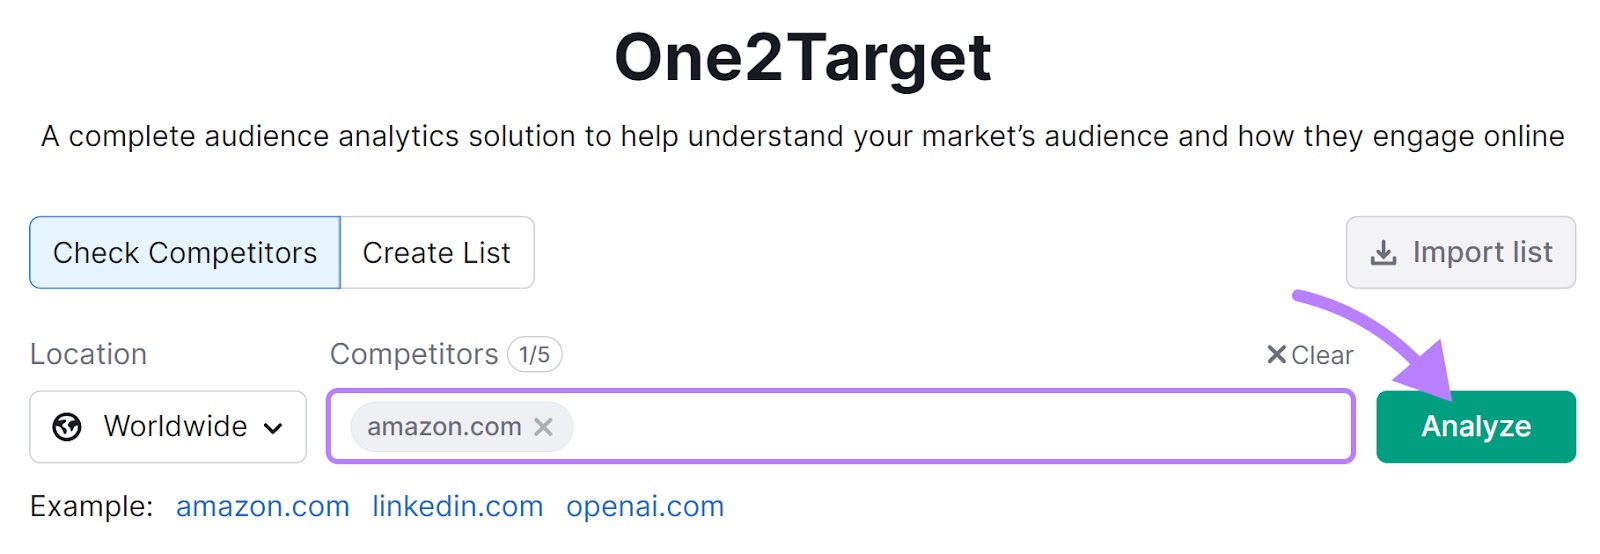 "amazon.com" entered into One2Target search bar